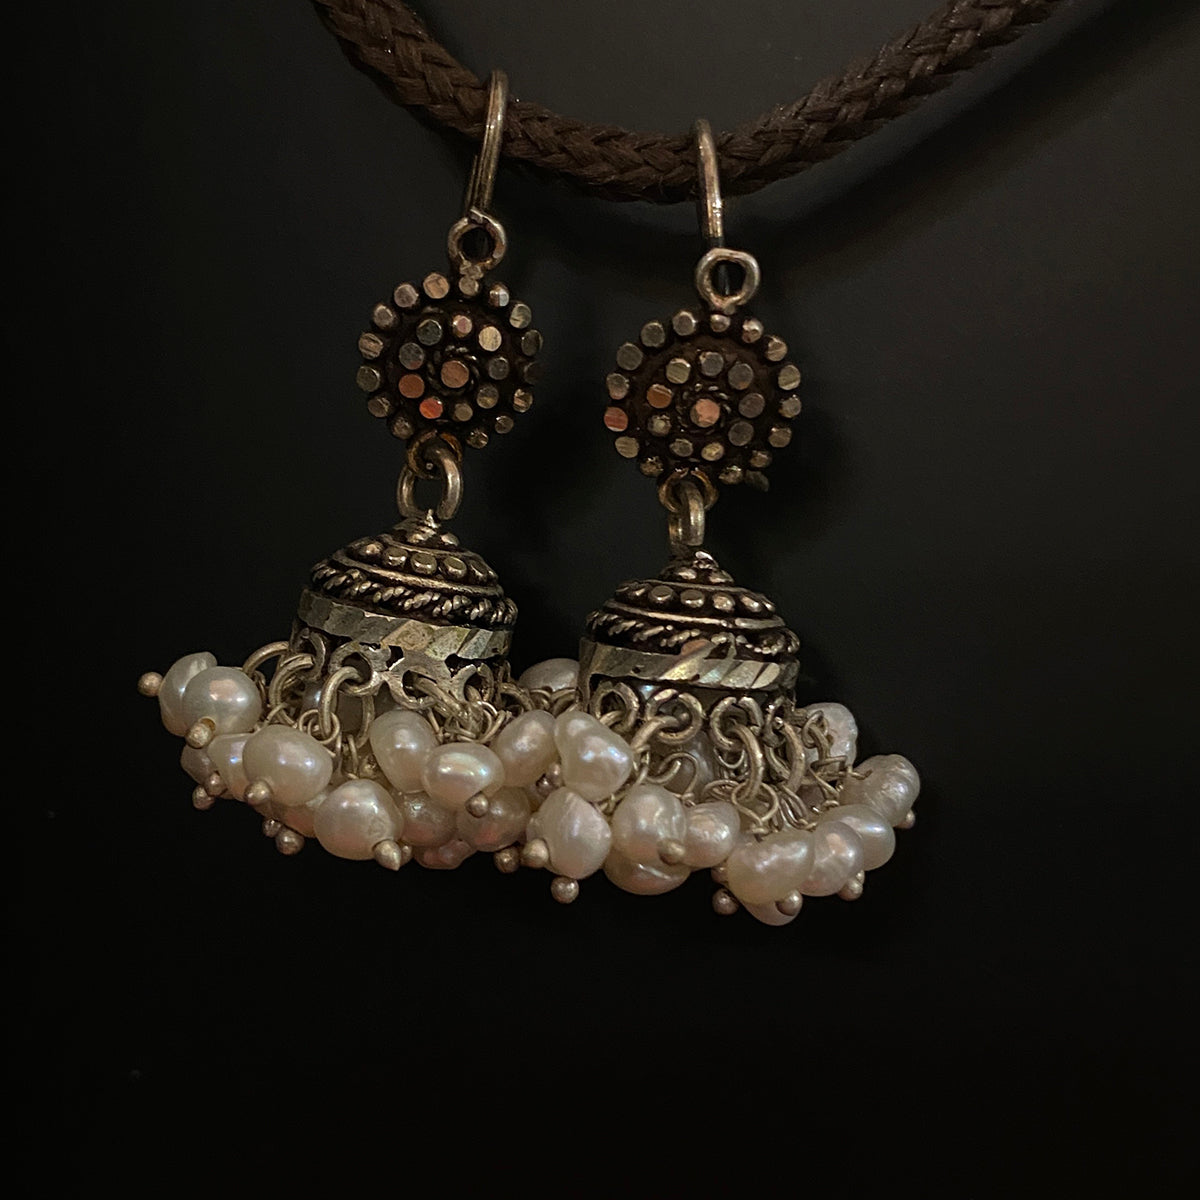 Silver Indian Jhumka Earrings with pearls - Vintage India NYC